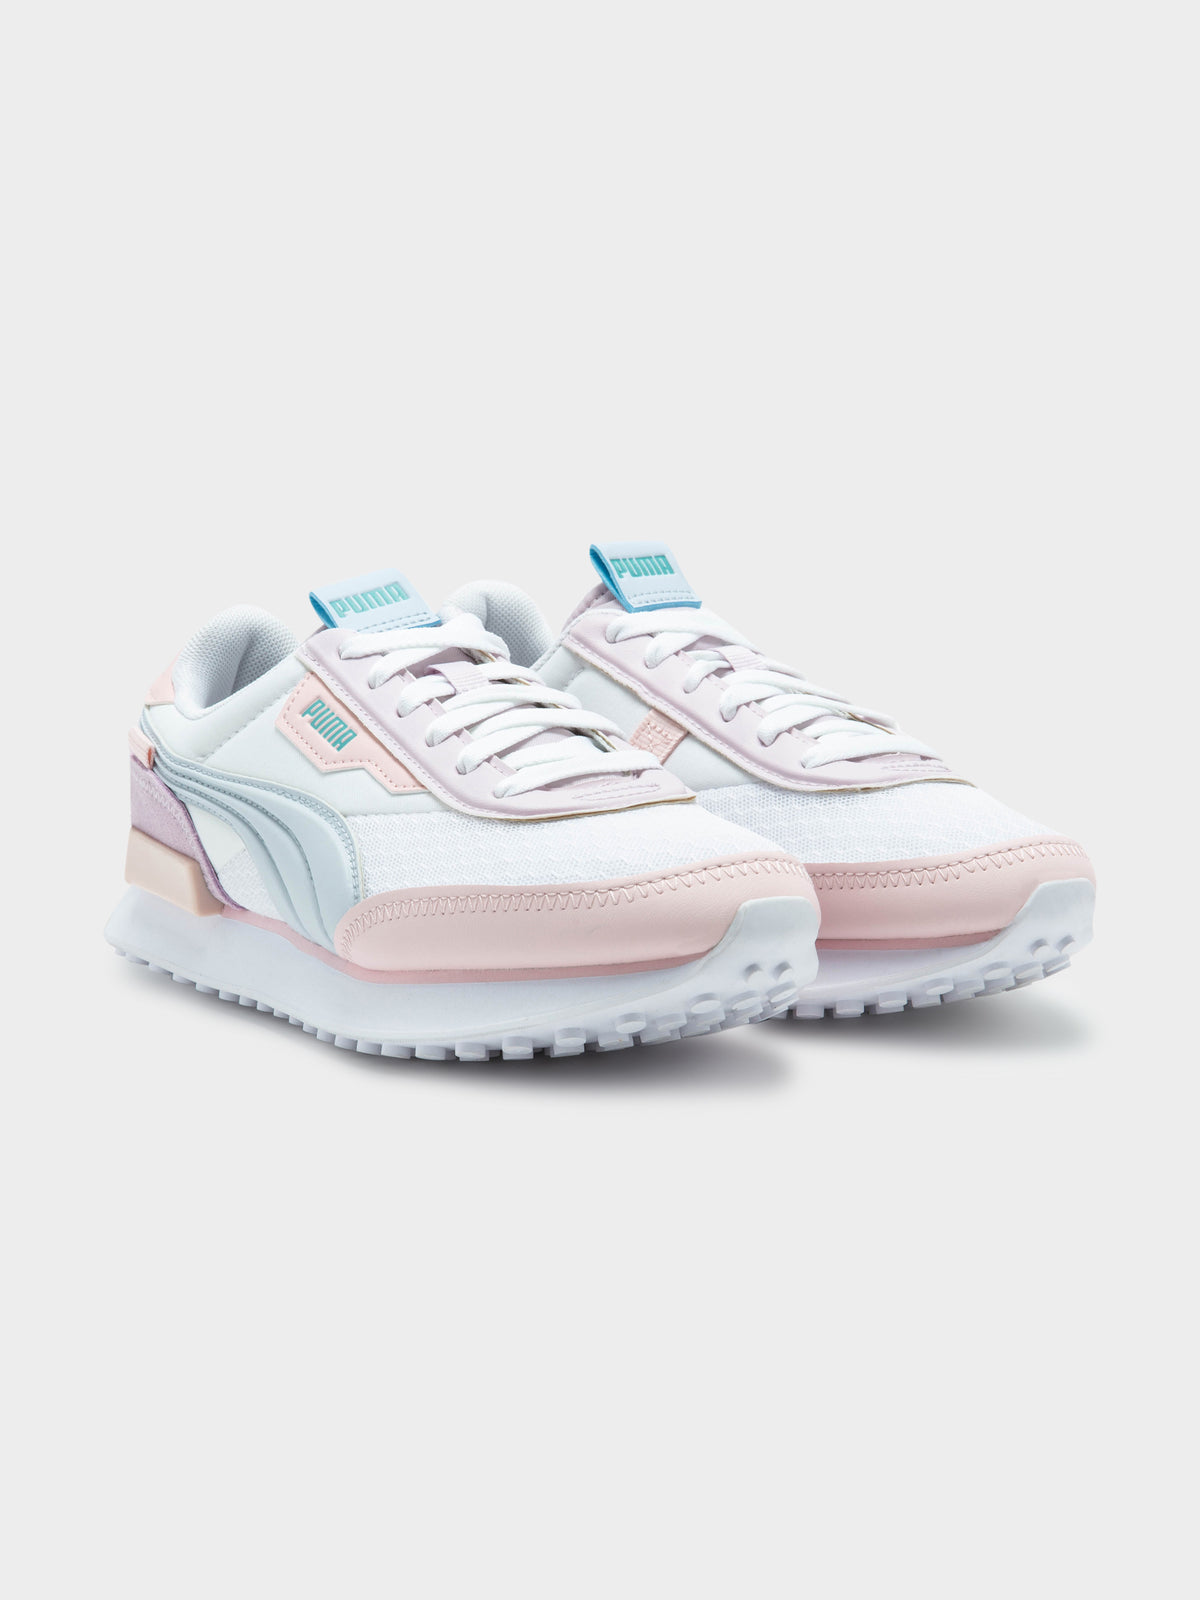 Womens Future Rider Sneakers in White &amp; Lilac